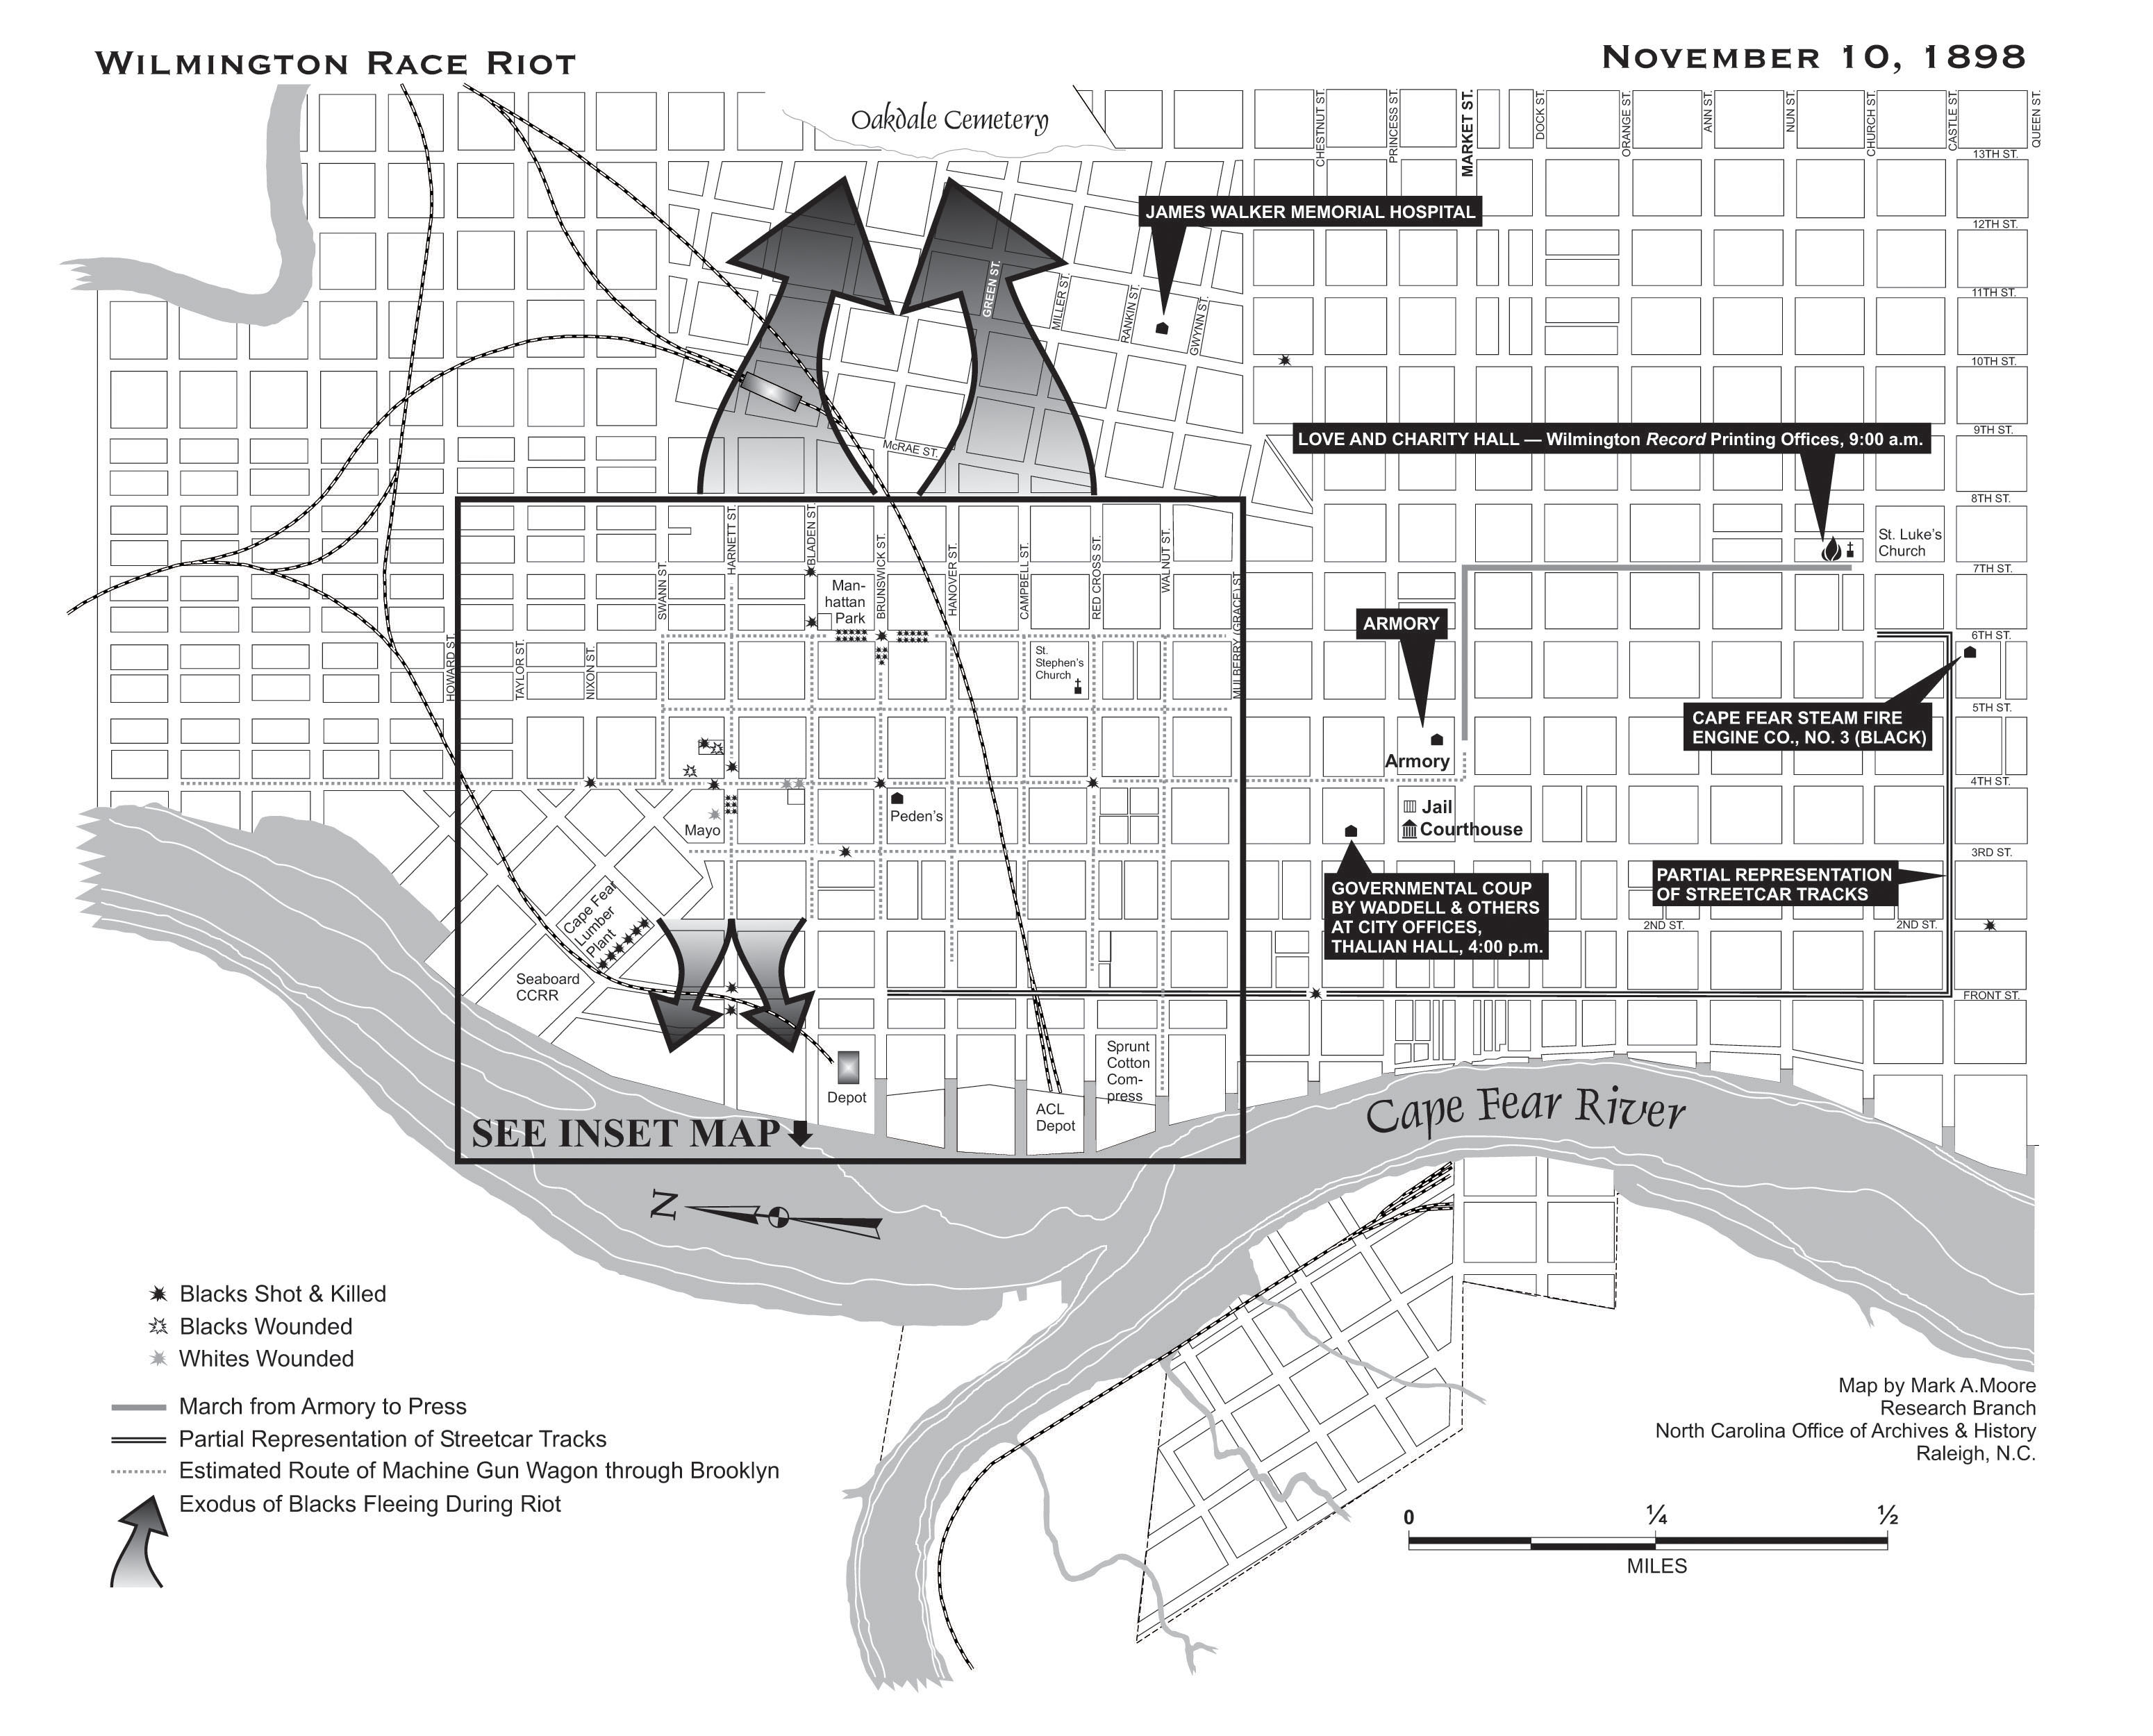 Modern map of the Wilmington Race Riot